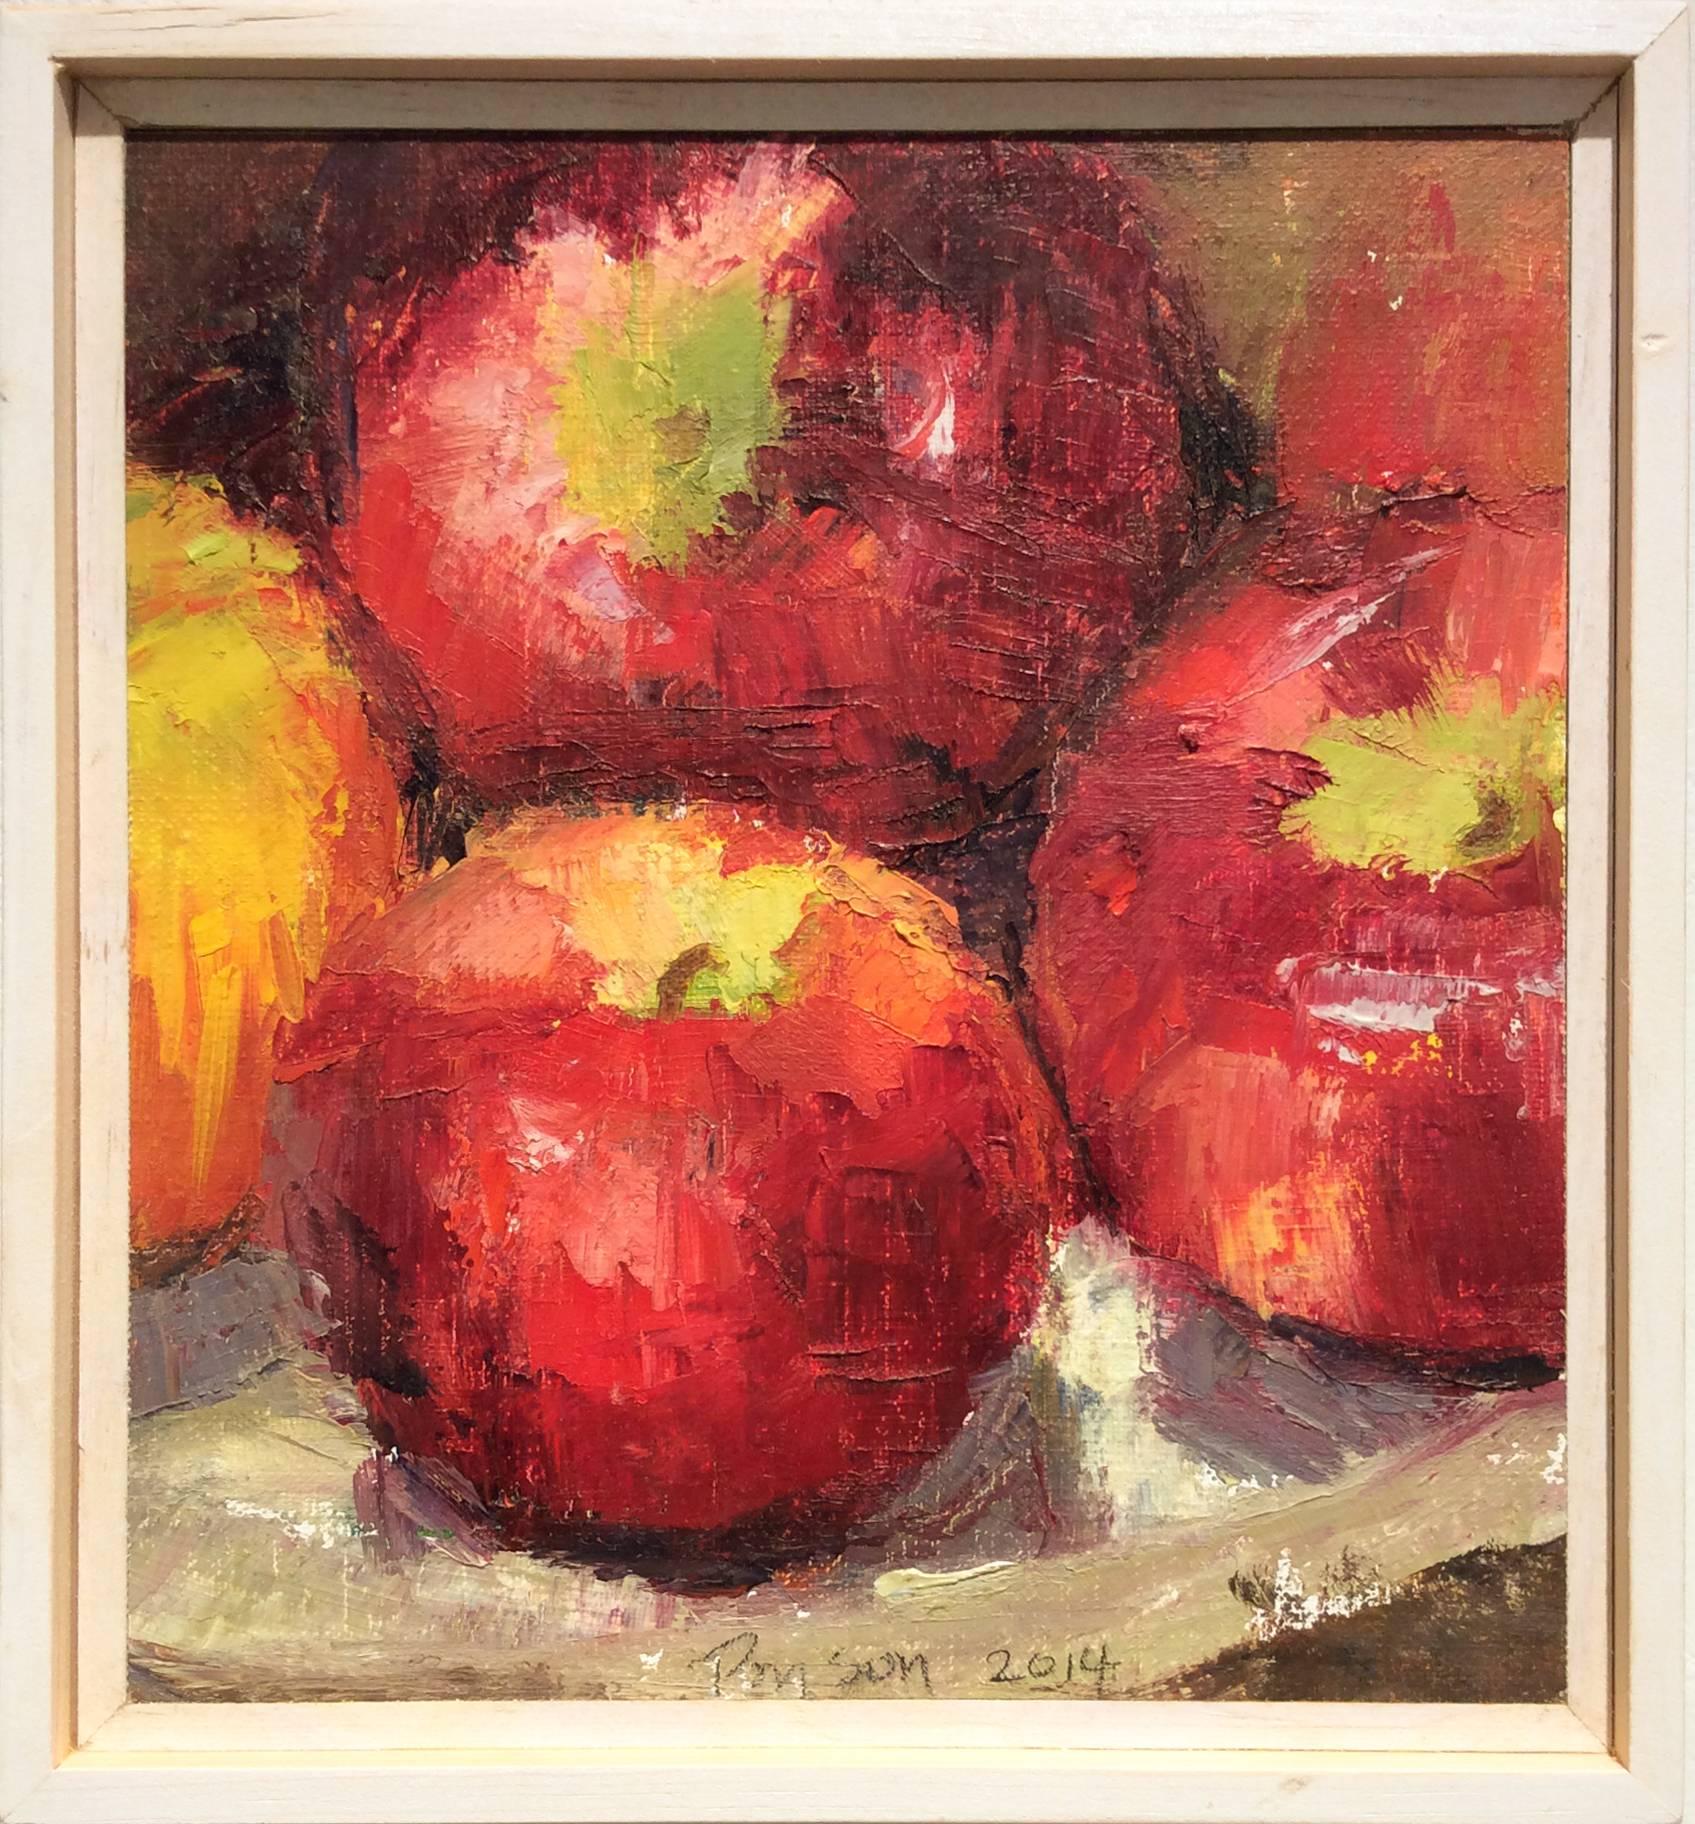 Dale Payson Still-Life Painting - Apples (Small Square Fruit Still Life Oil Painting of Red Apples in Wood Frame)